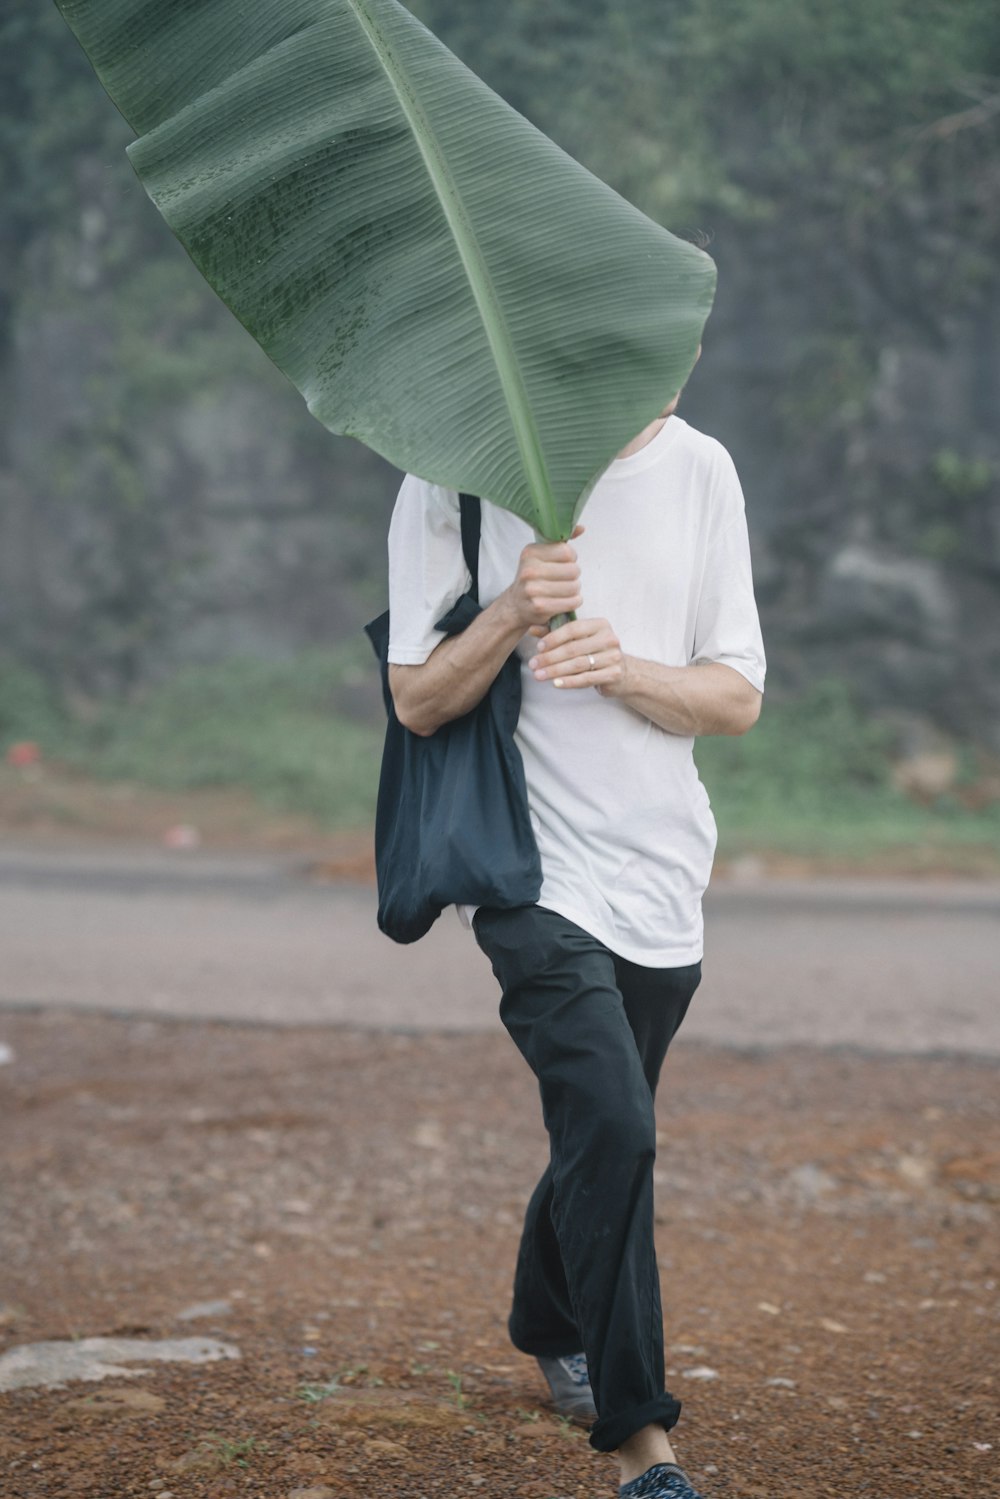 person in white shirt and black pants holding green umbrella